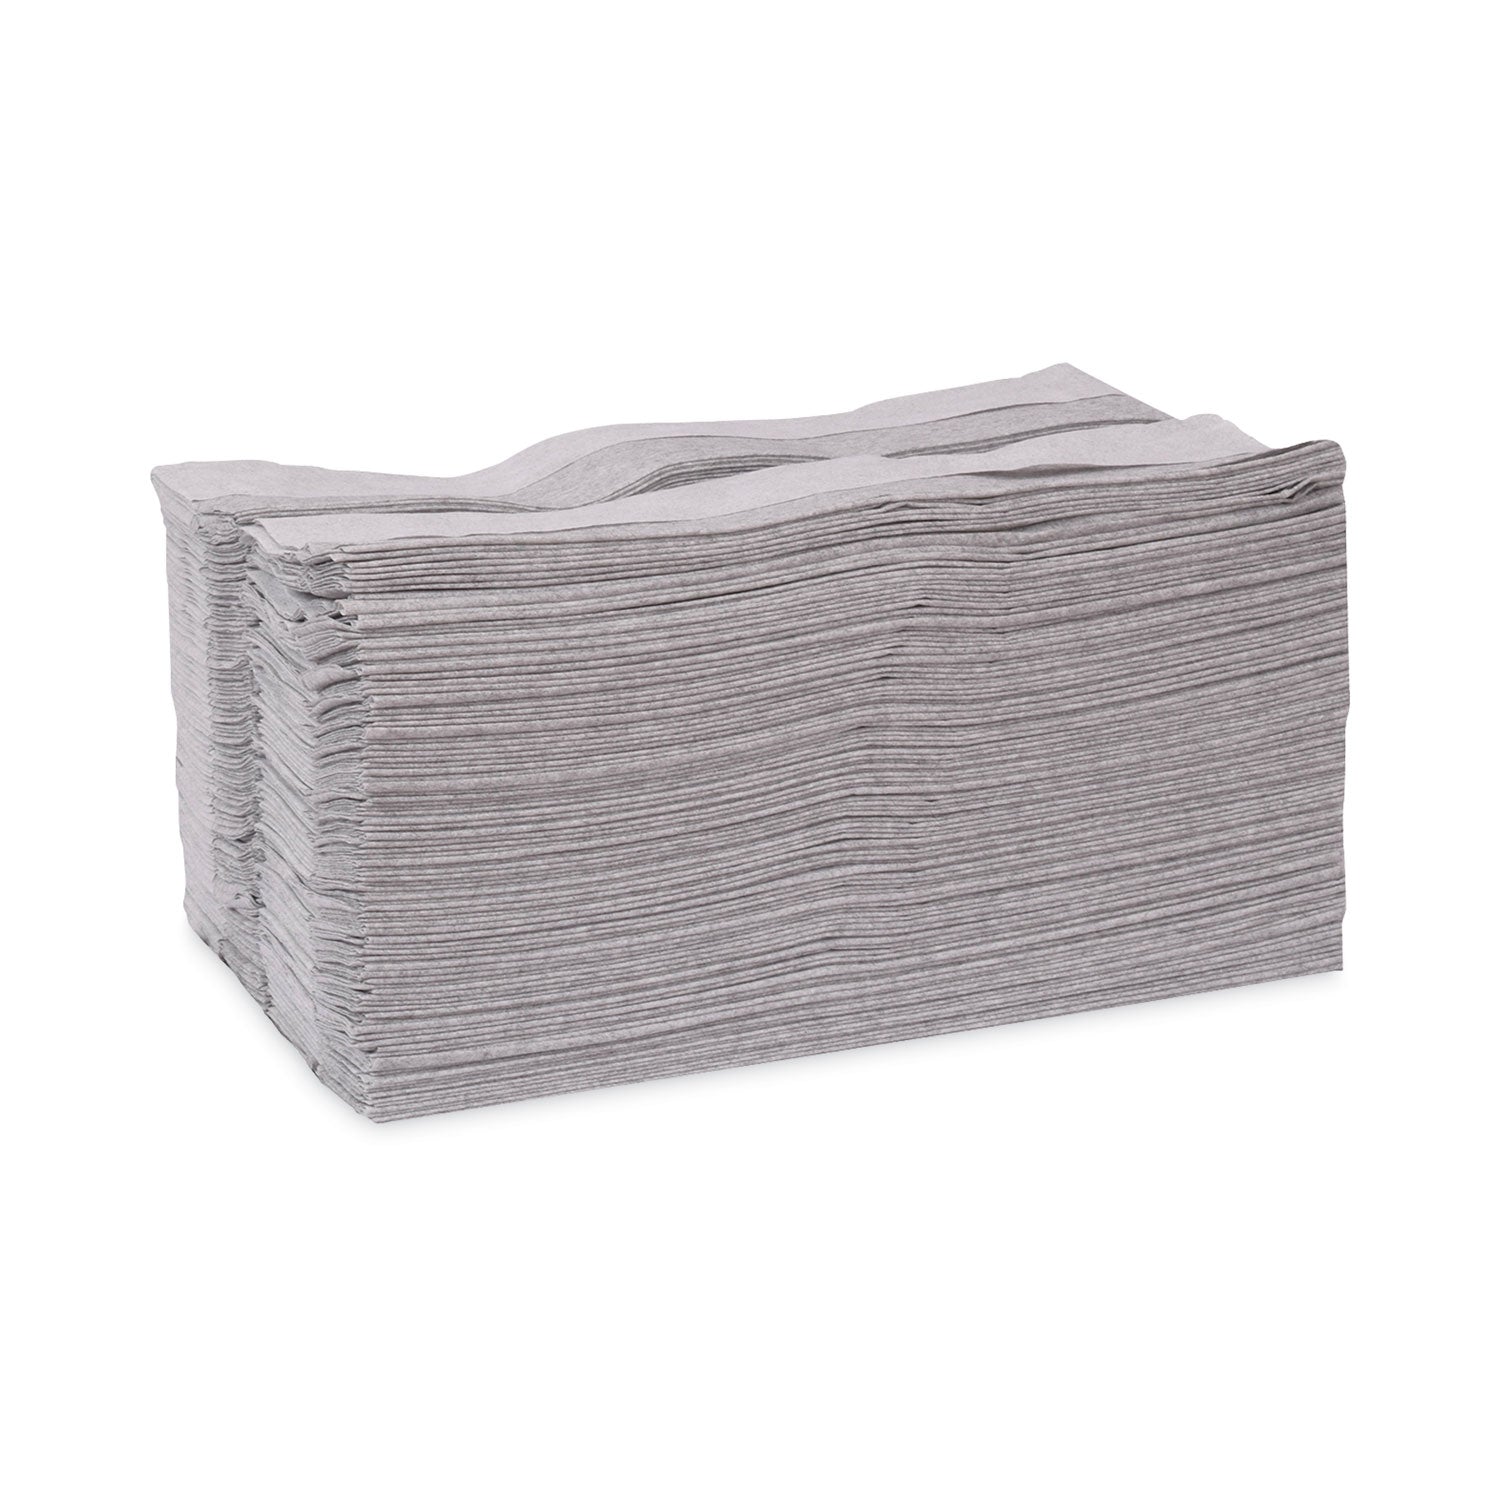 industrial-cleaning-cloths-1-ply-1634-x-14-gray-210-wipes-box_trk520374 - 2